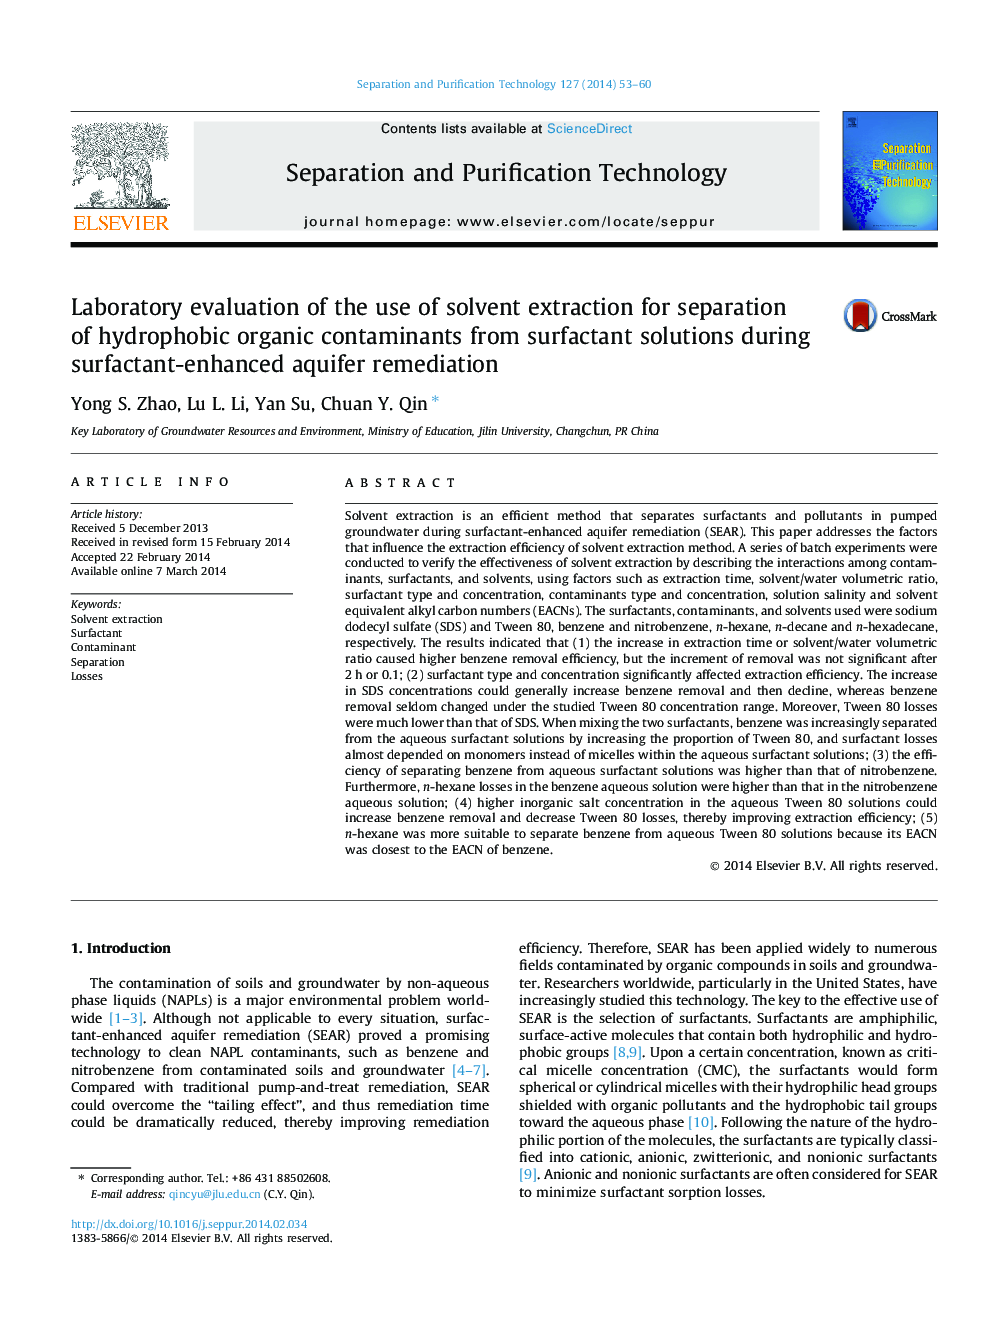 Laboratory evaluation of the use of solvent extraction for separation of hydrophobic organic contaminants from surfactant solutions during surfactant-enhanced aquifer remediation